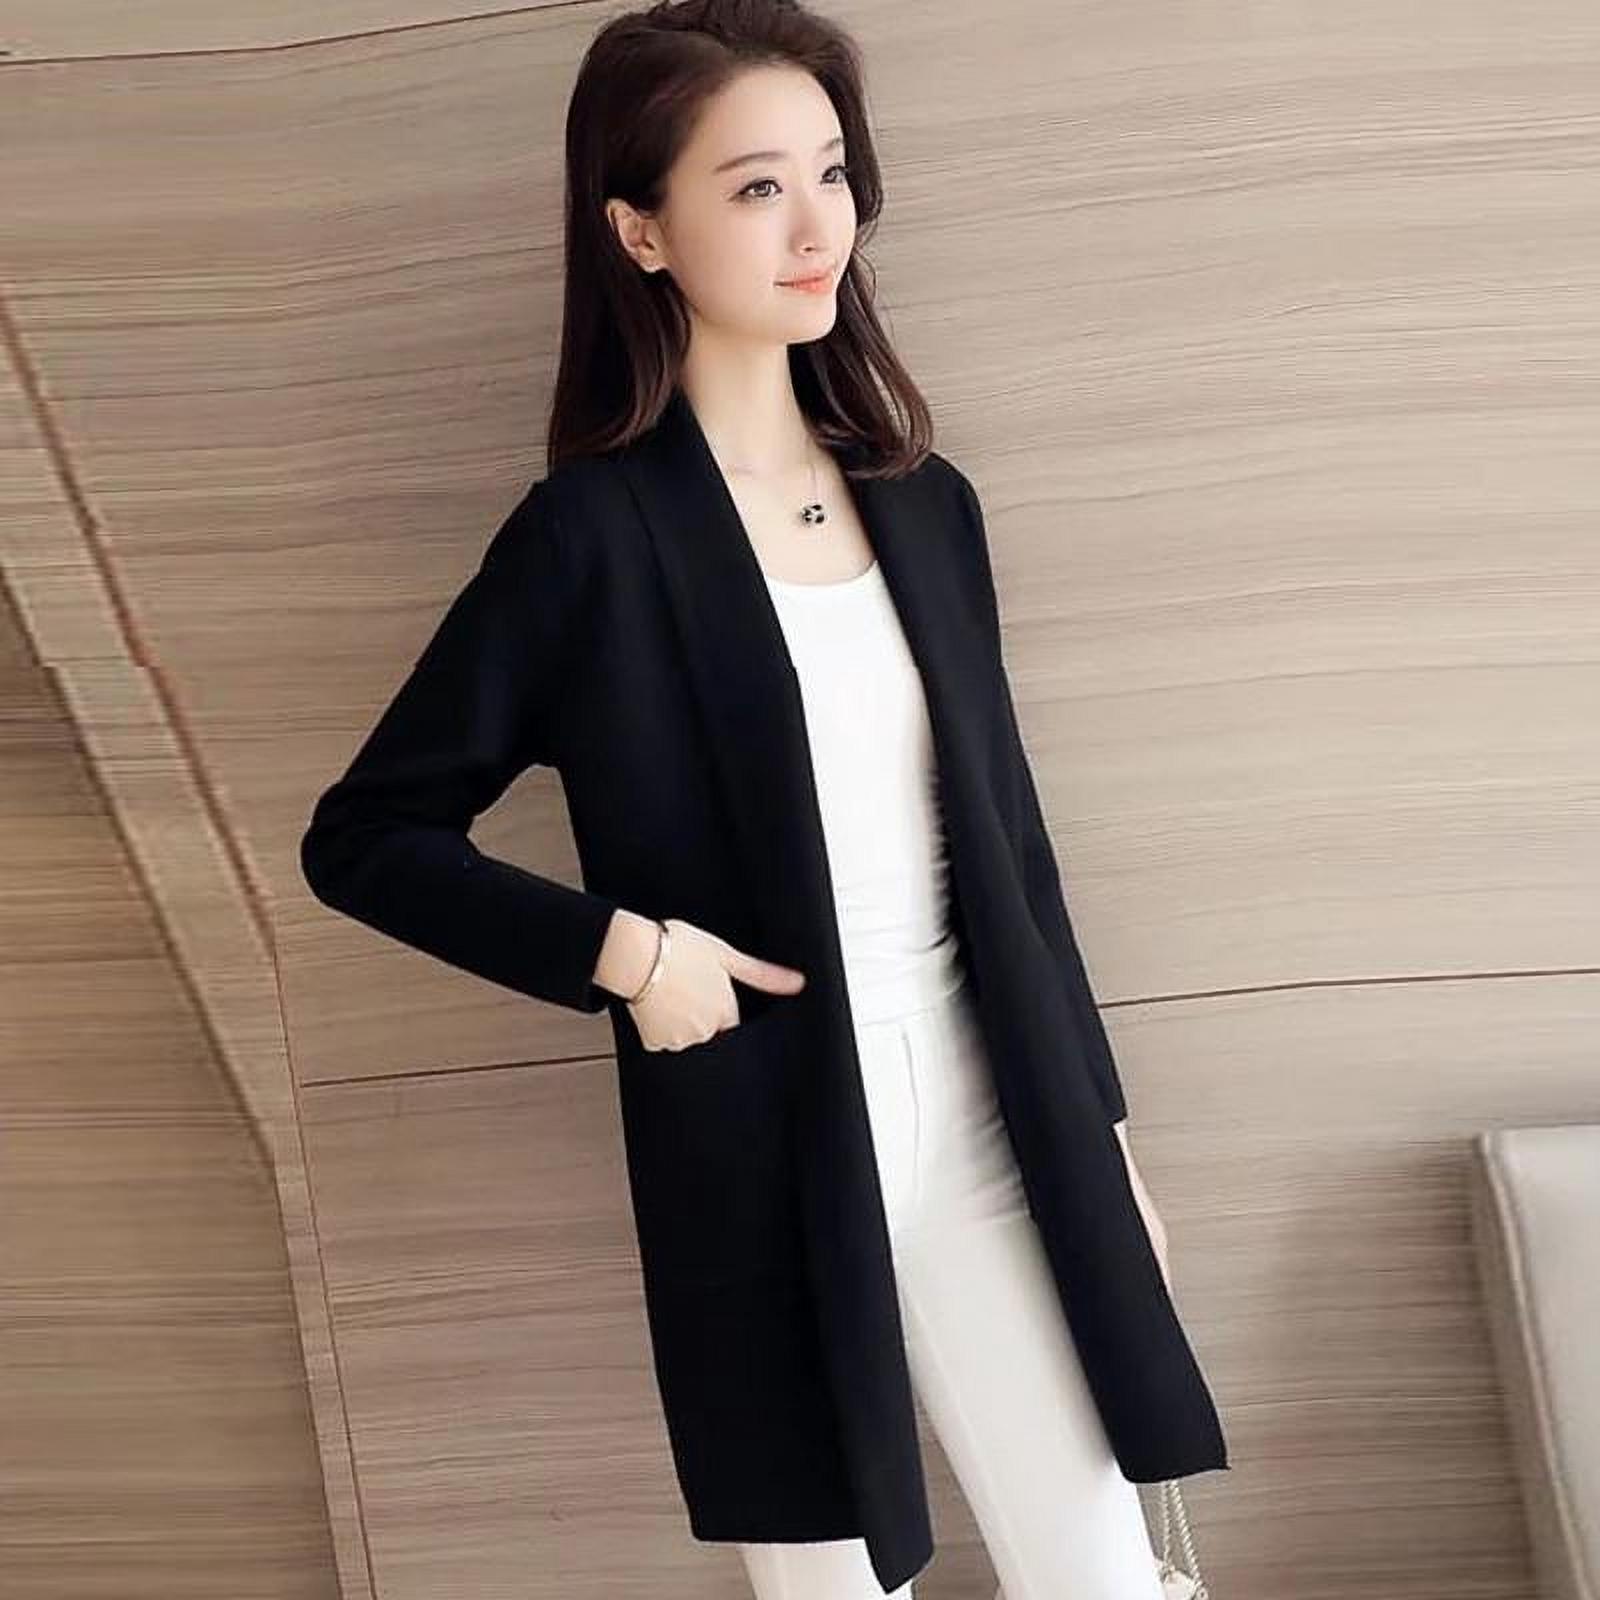 JANDEL Korean Style Loose Casual Solid Color Knit Cardigan Fashion Trend Long-sleeved Women's Coat, Women's Jacket, Long Coat - image 2 of 5